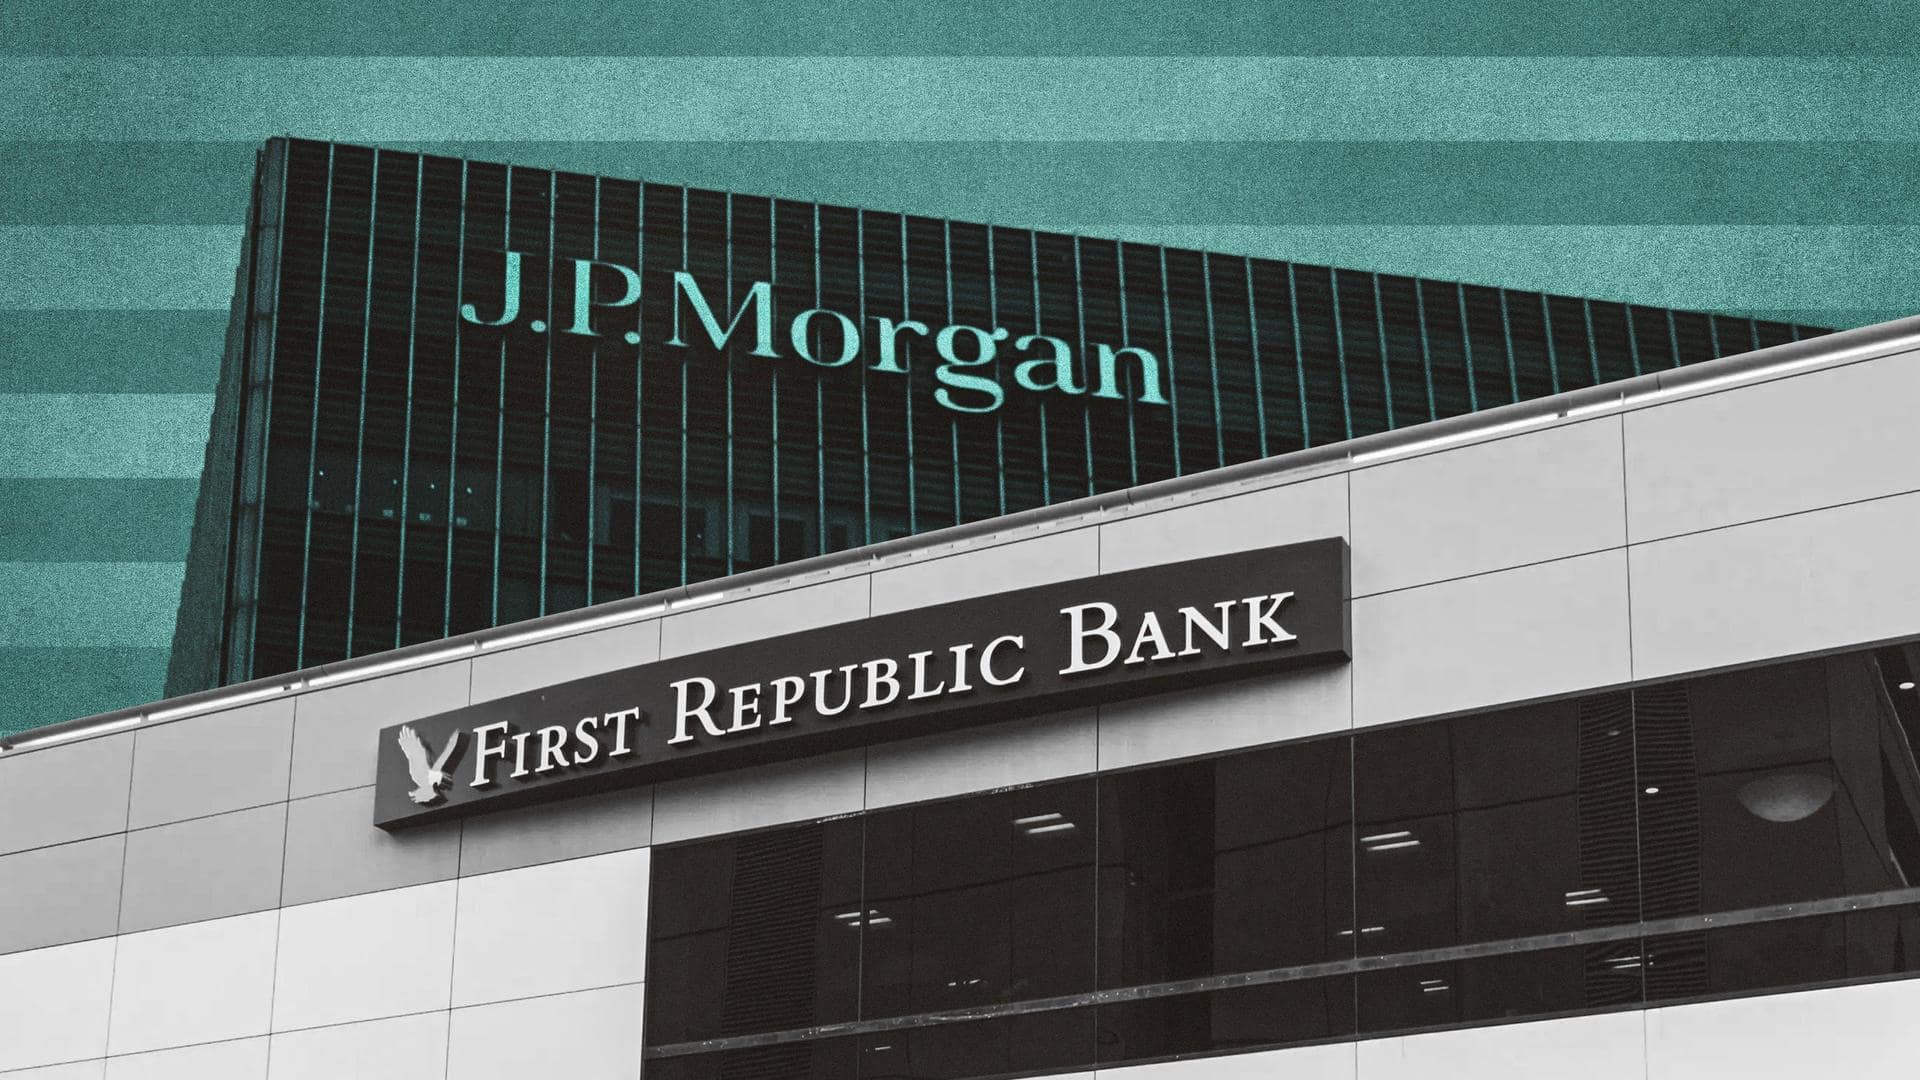 First Republic Bank's assets seized, JPMorgan to take over